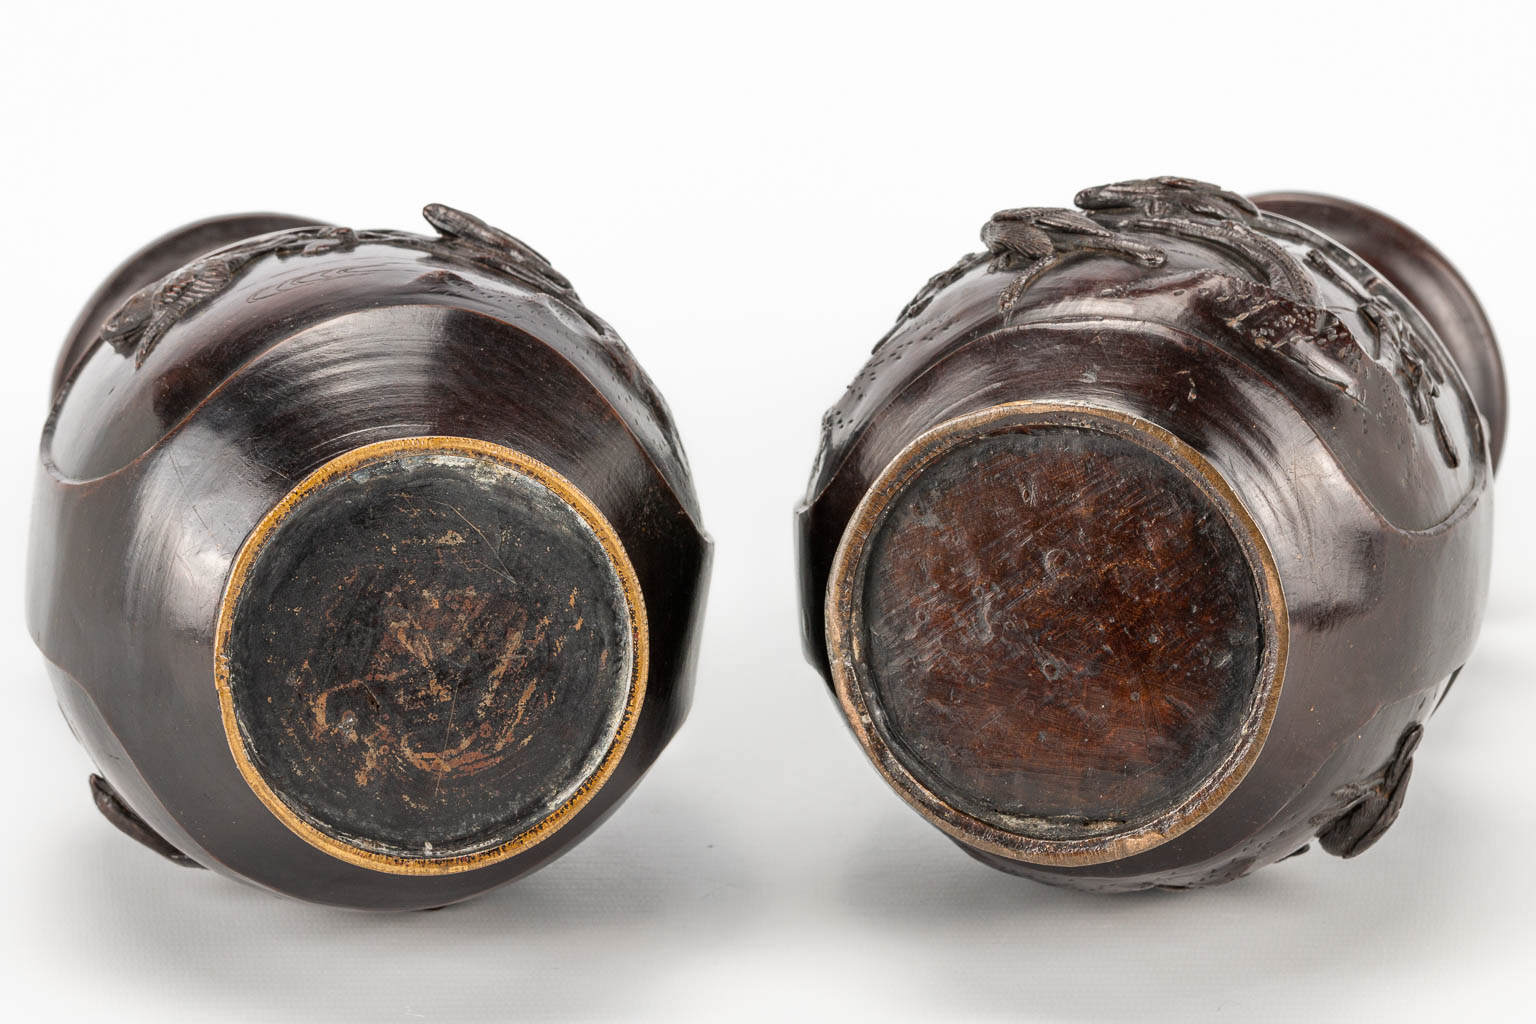 A pair of vases made of bronze with bird decor, Japan Meiji, 19th century. (30 x 12,5 cm) - Image 19 of 19